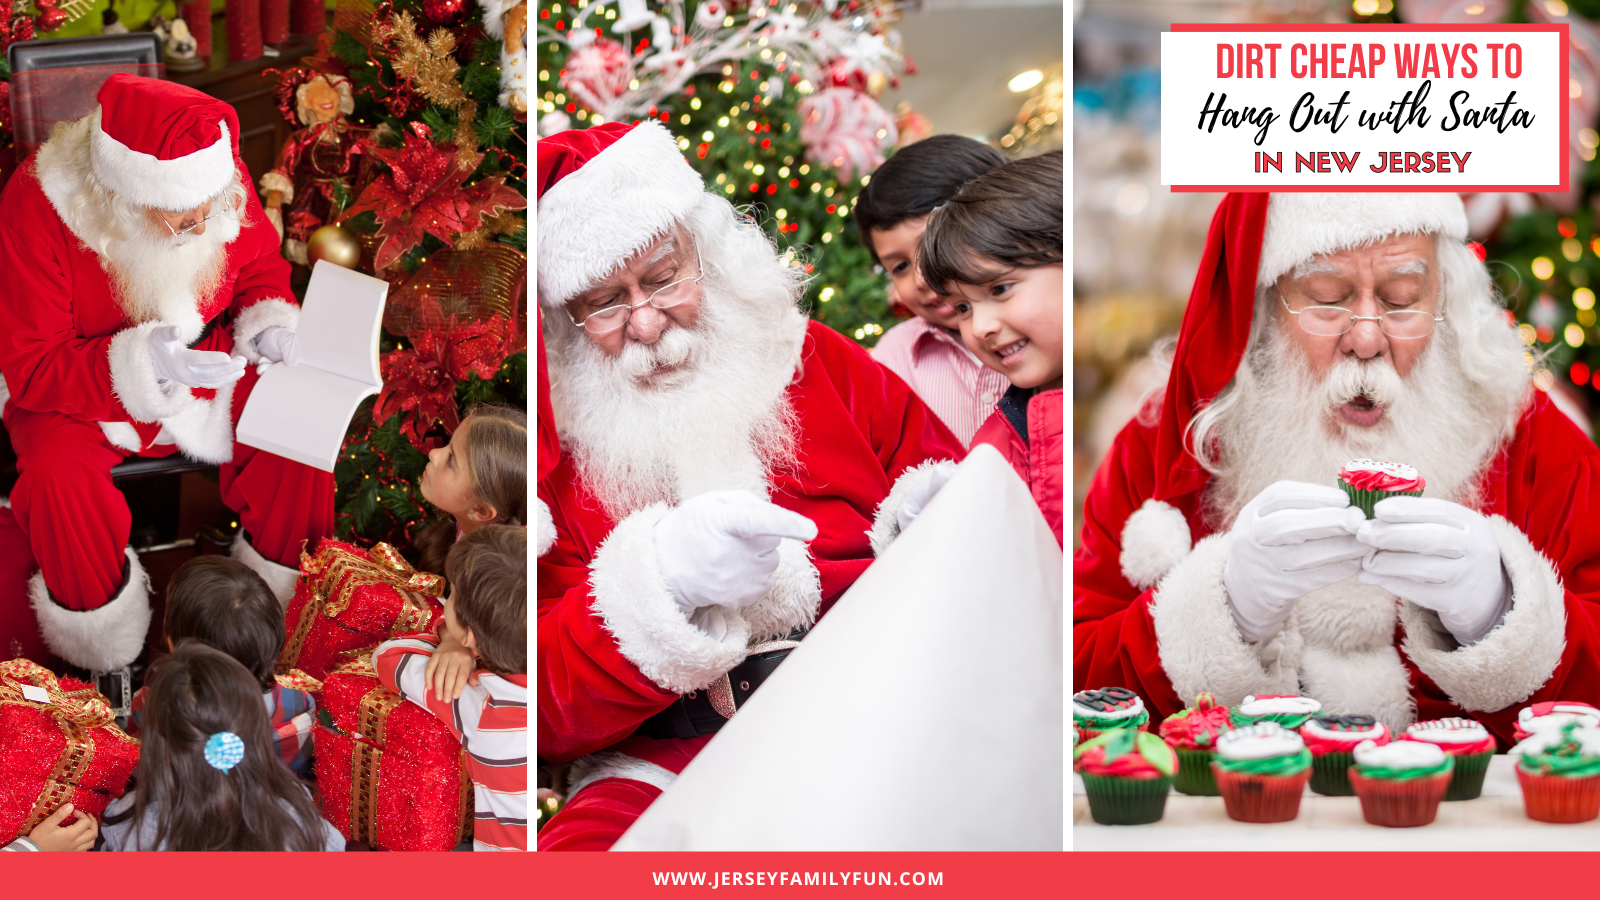 Dirt-Cheap-Ways-to-Hang-Out-with-Santa-in-New-Jersey-Long-Horizontal-image